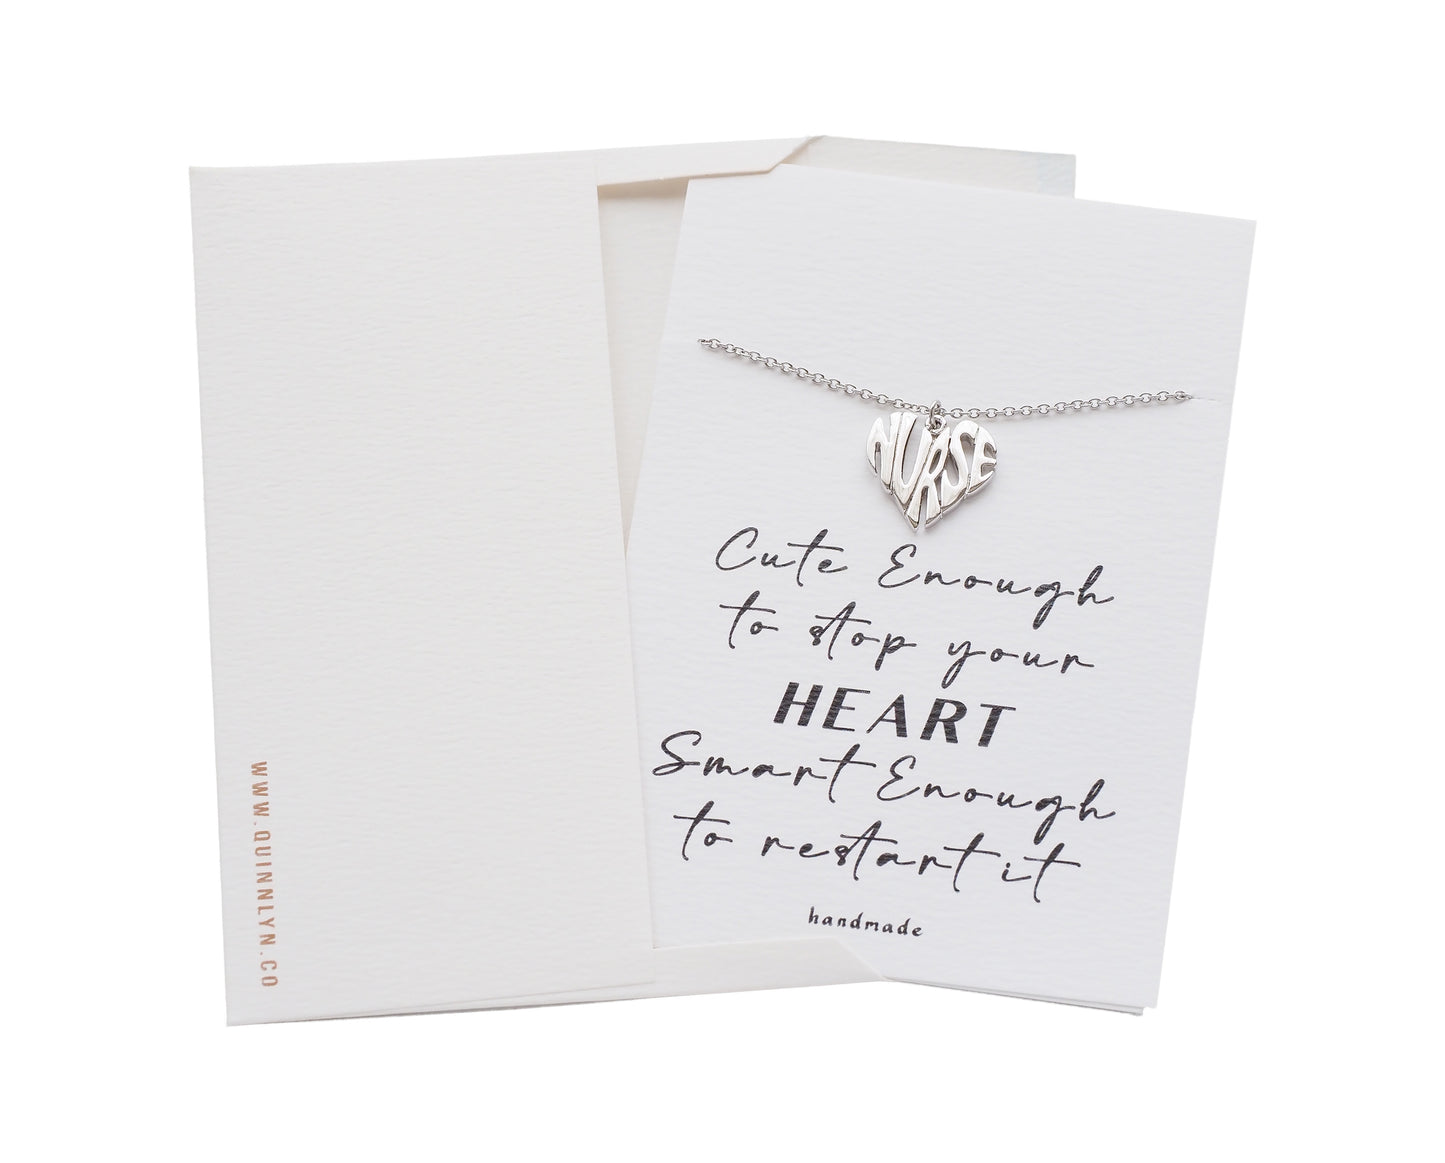 Quinnlyn & Co. Heart Pendant Necklace, Nurse Gifts for Women with Greeting Card